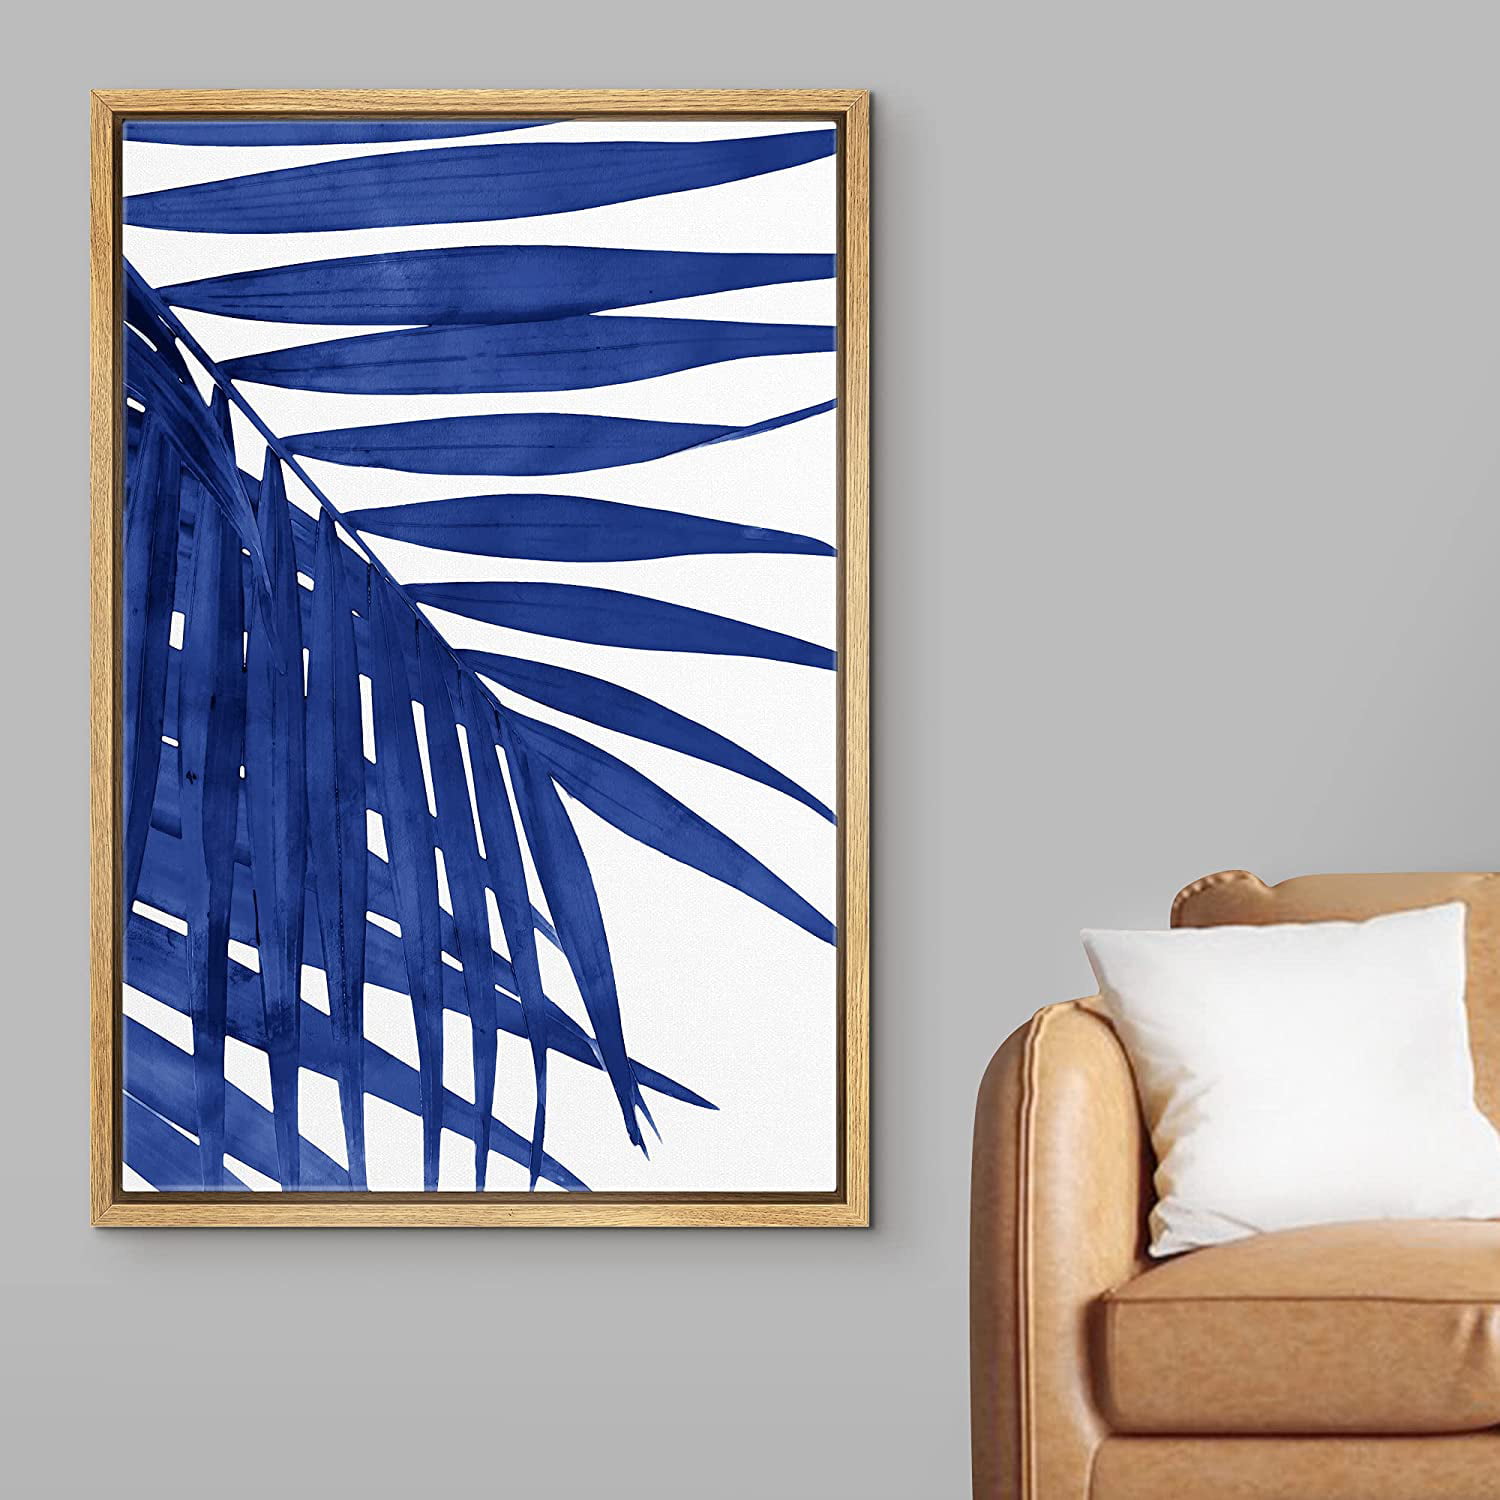 Blue Palm Leaf Watercolor Wall Mural